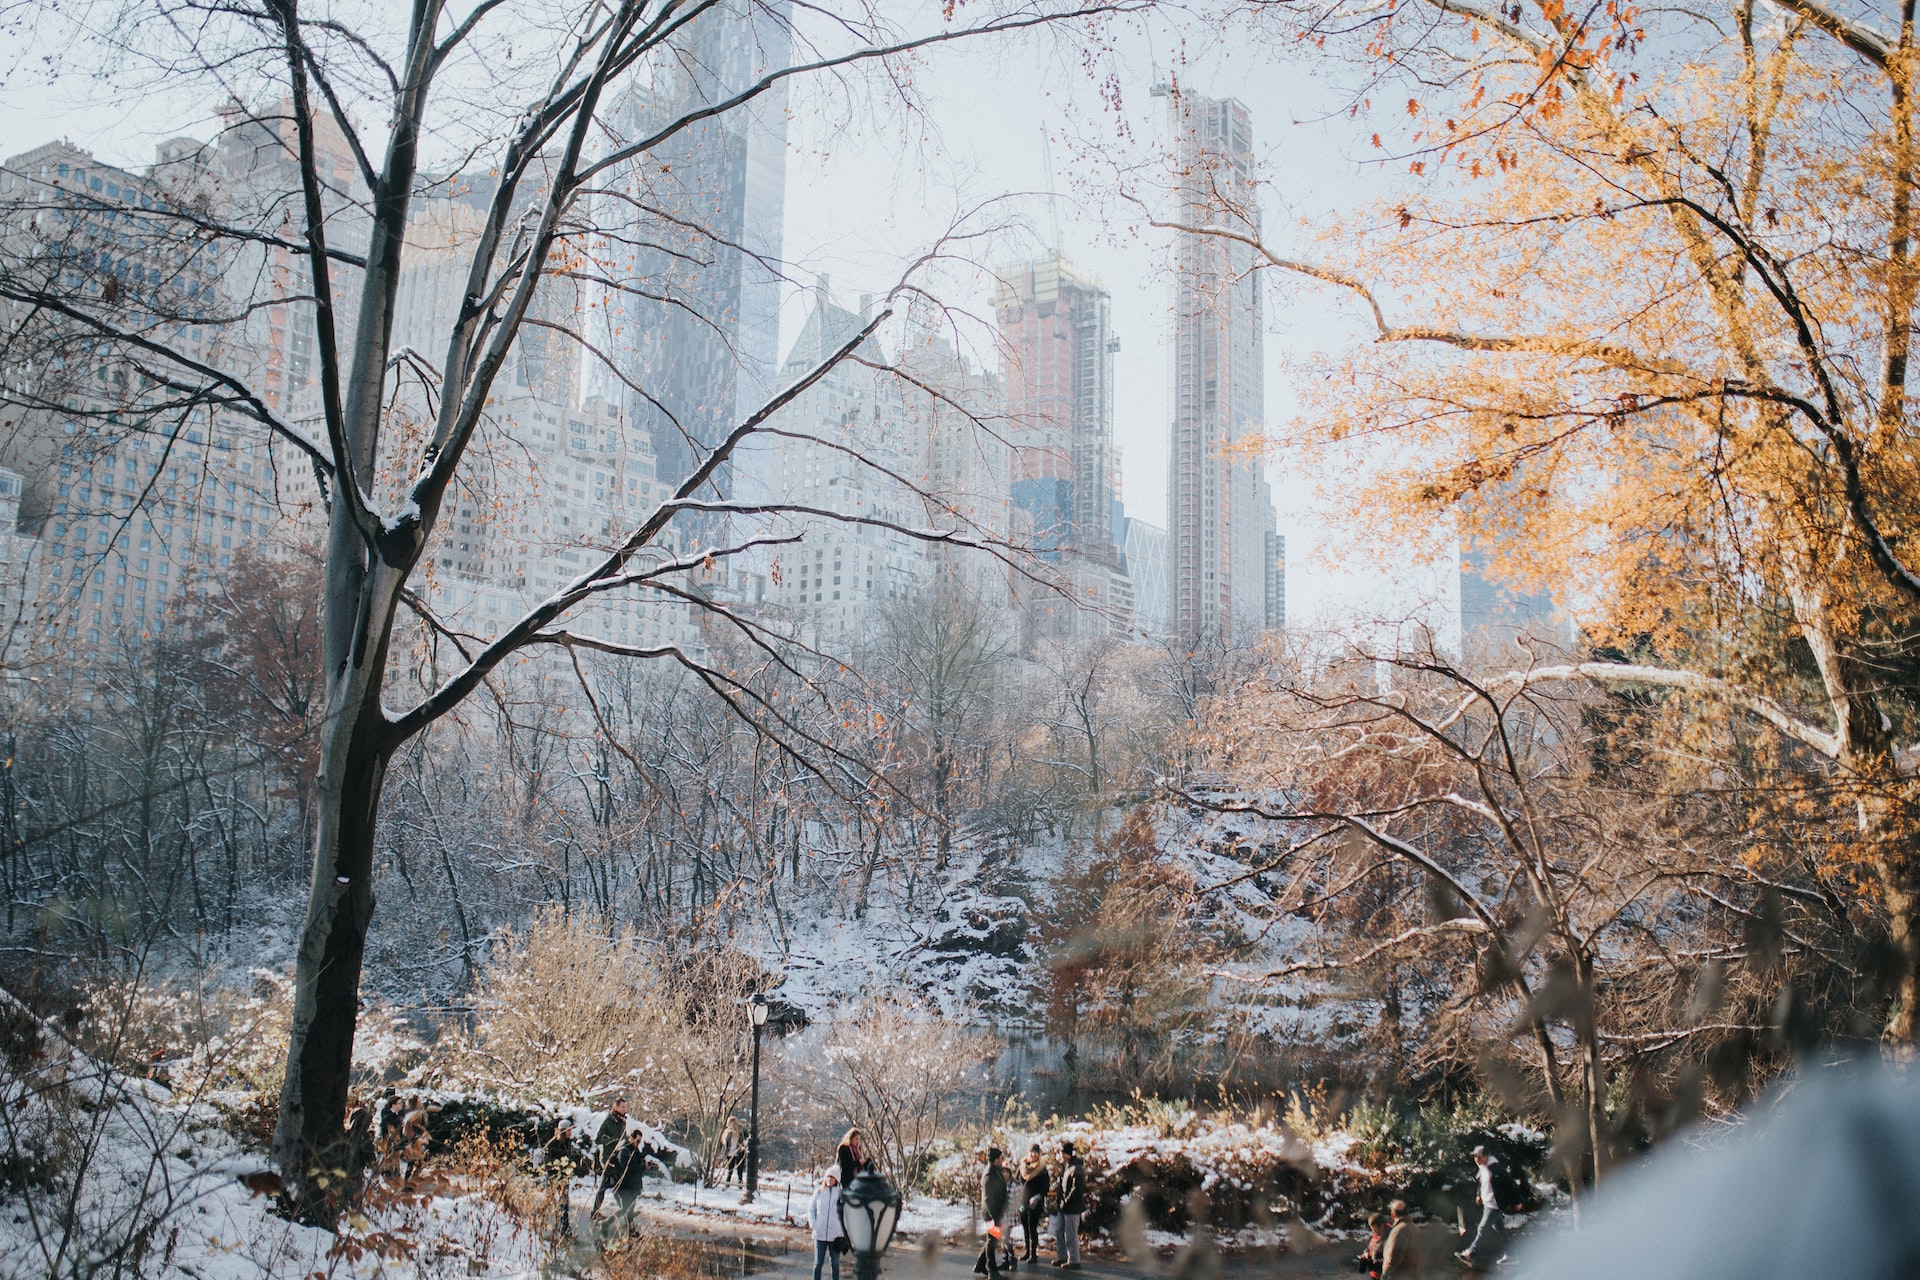 Weather, like snow in Central Park, is why NYC is a great last-minute destination.